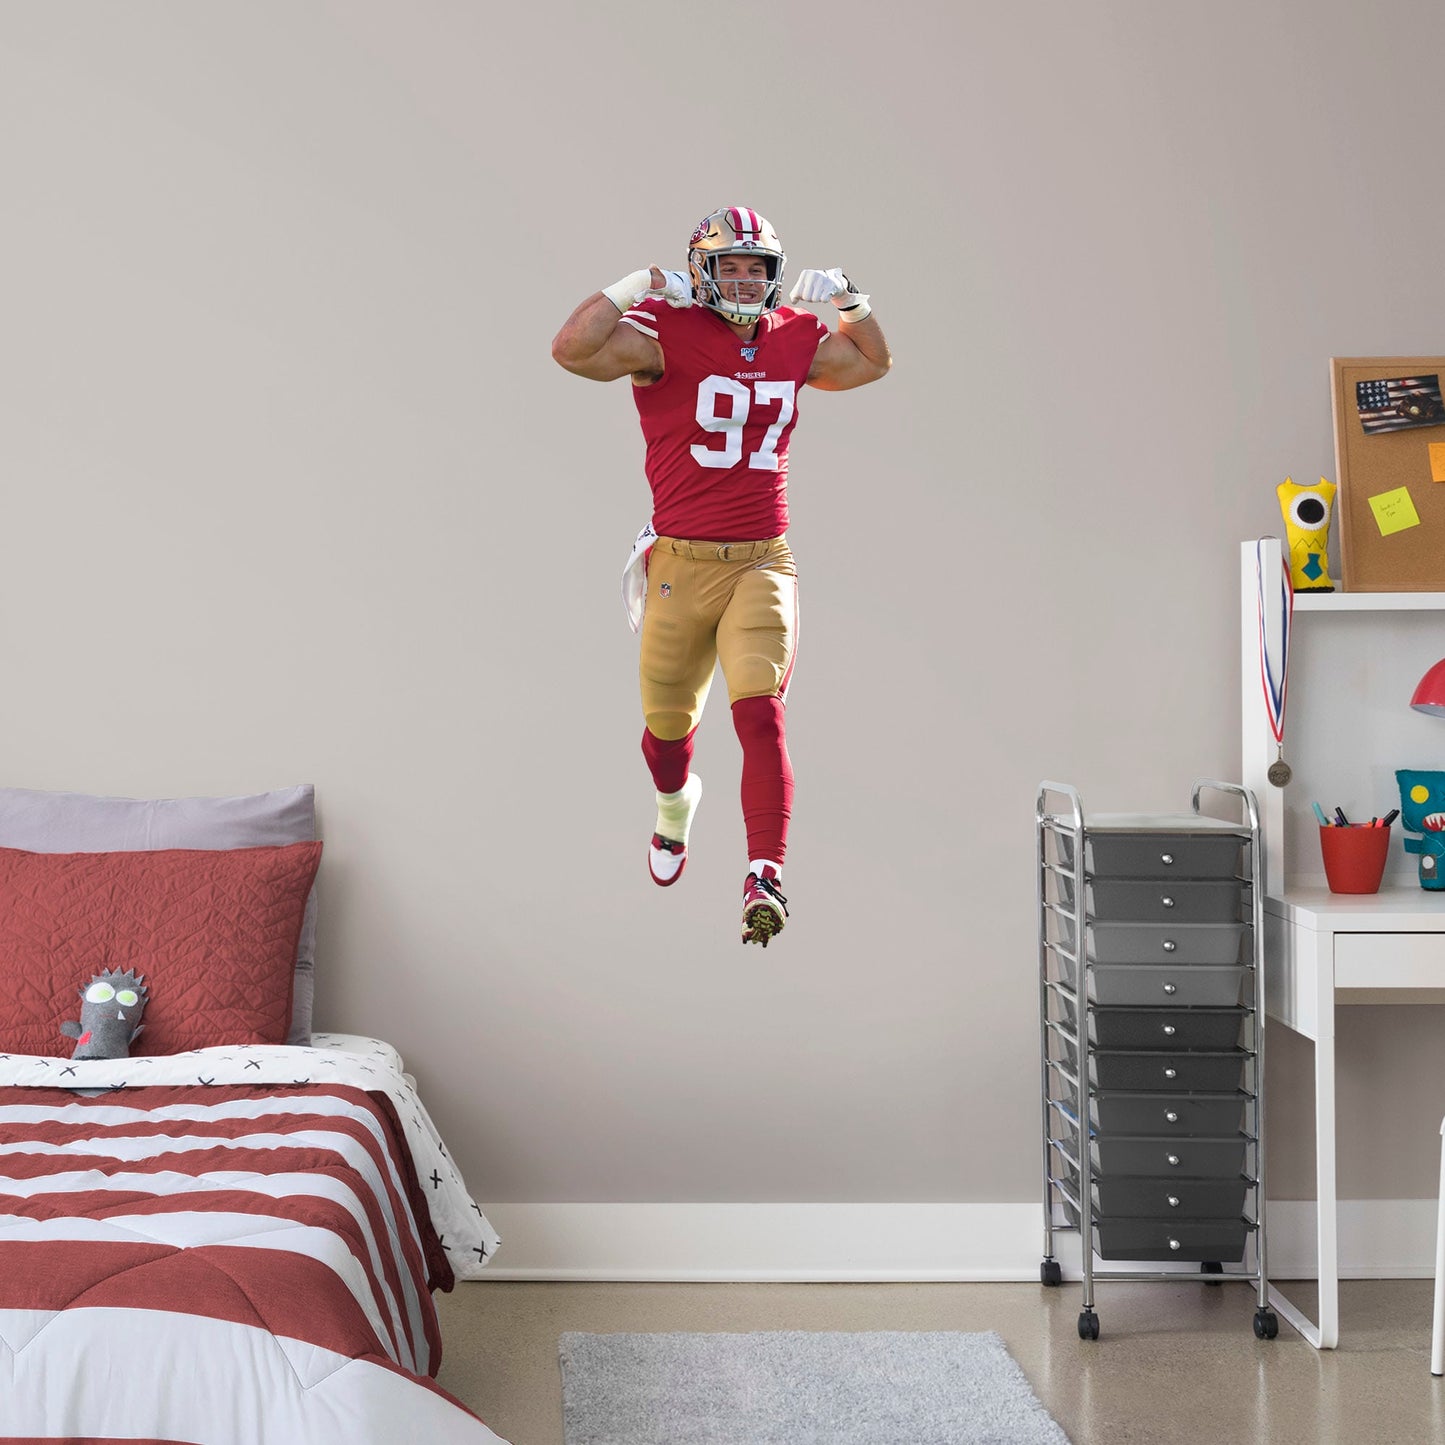 Giant Athlete + 2 Decals (23"W x 51"H) Get personally flexed on by Nick Bosa with this unique officially licensed NFL wall decal! The 2019 Defensive Rookie of the Year likely has plenty of tackles ahead of him, and you can celebrate every one for years to come thanks to this high-quality graphic. The reusable design lets you move the Pro Bowl player wherever you choose, so you can celebrate in your bedroom, dorm room, or living room.